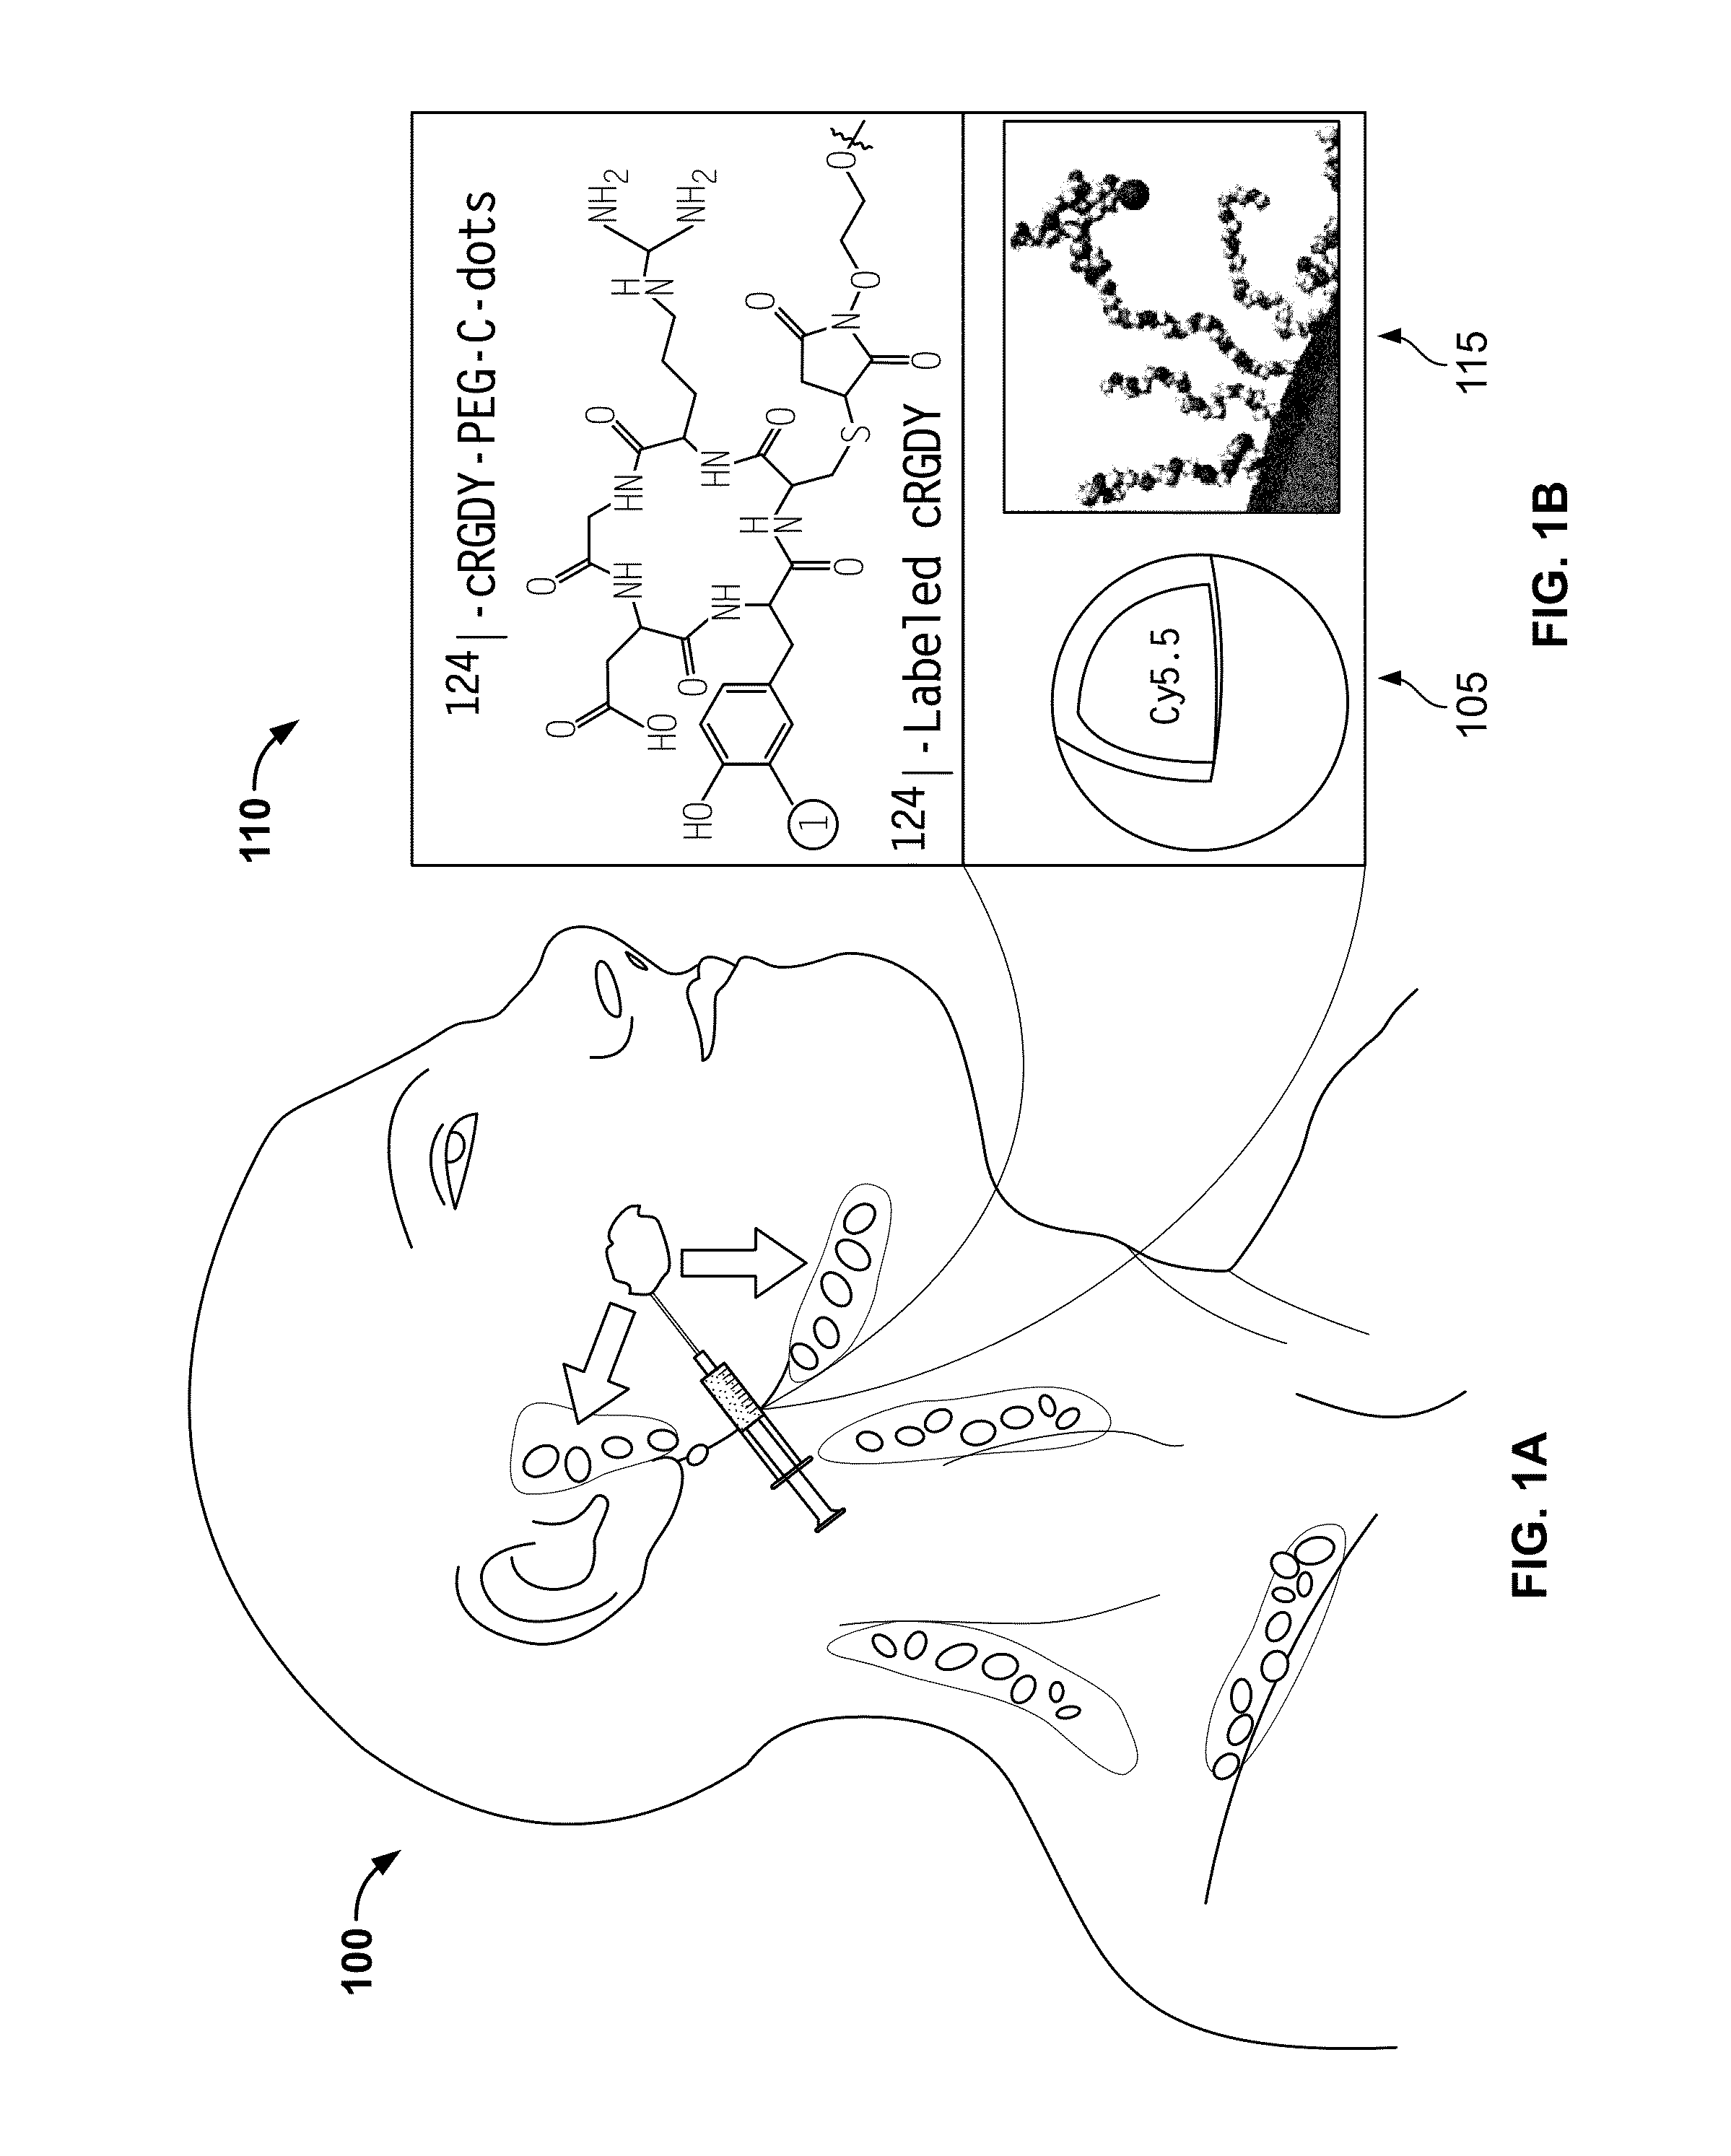 Systems, methods, and apparatus for multichannel imaging of fluorescent sources in real time